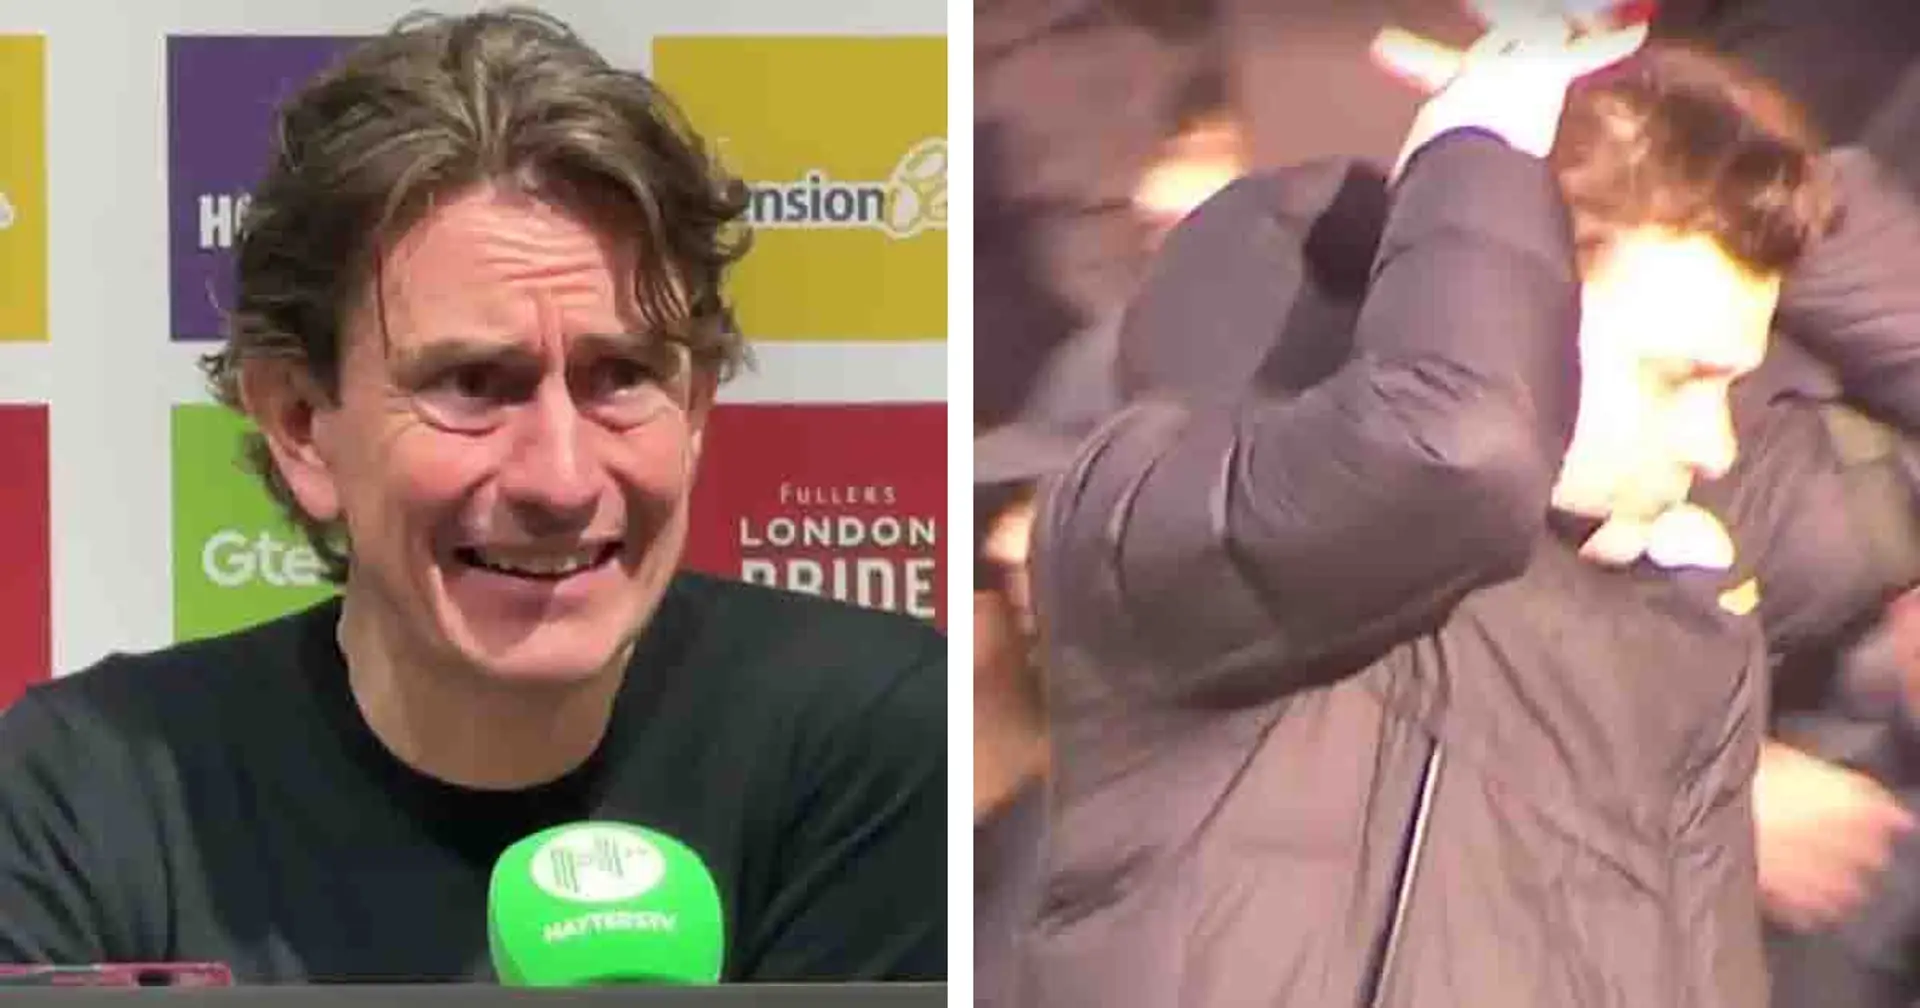 'They’ve been very unlucky’: Brentford boss leaps to Pochettino's defence after fan booing